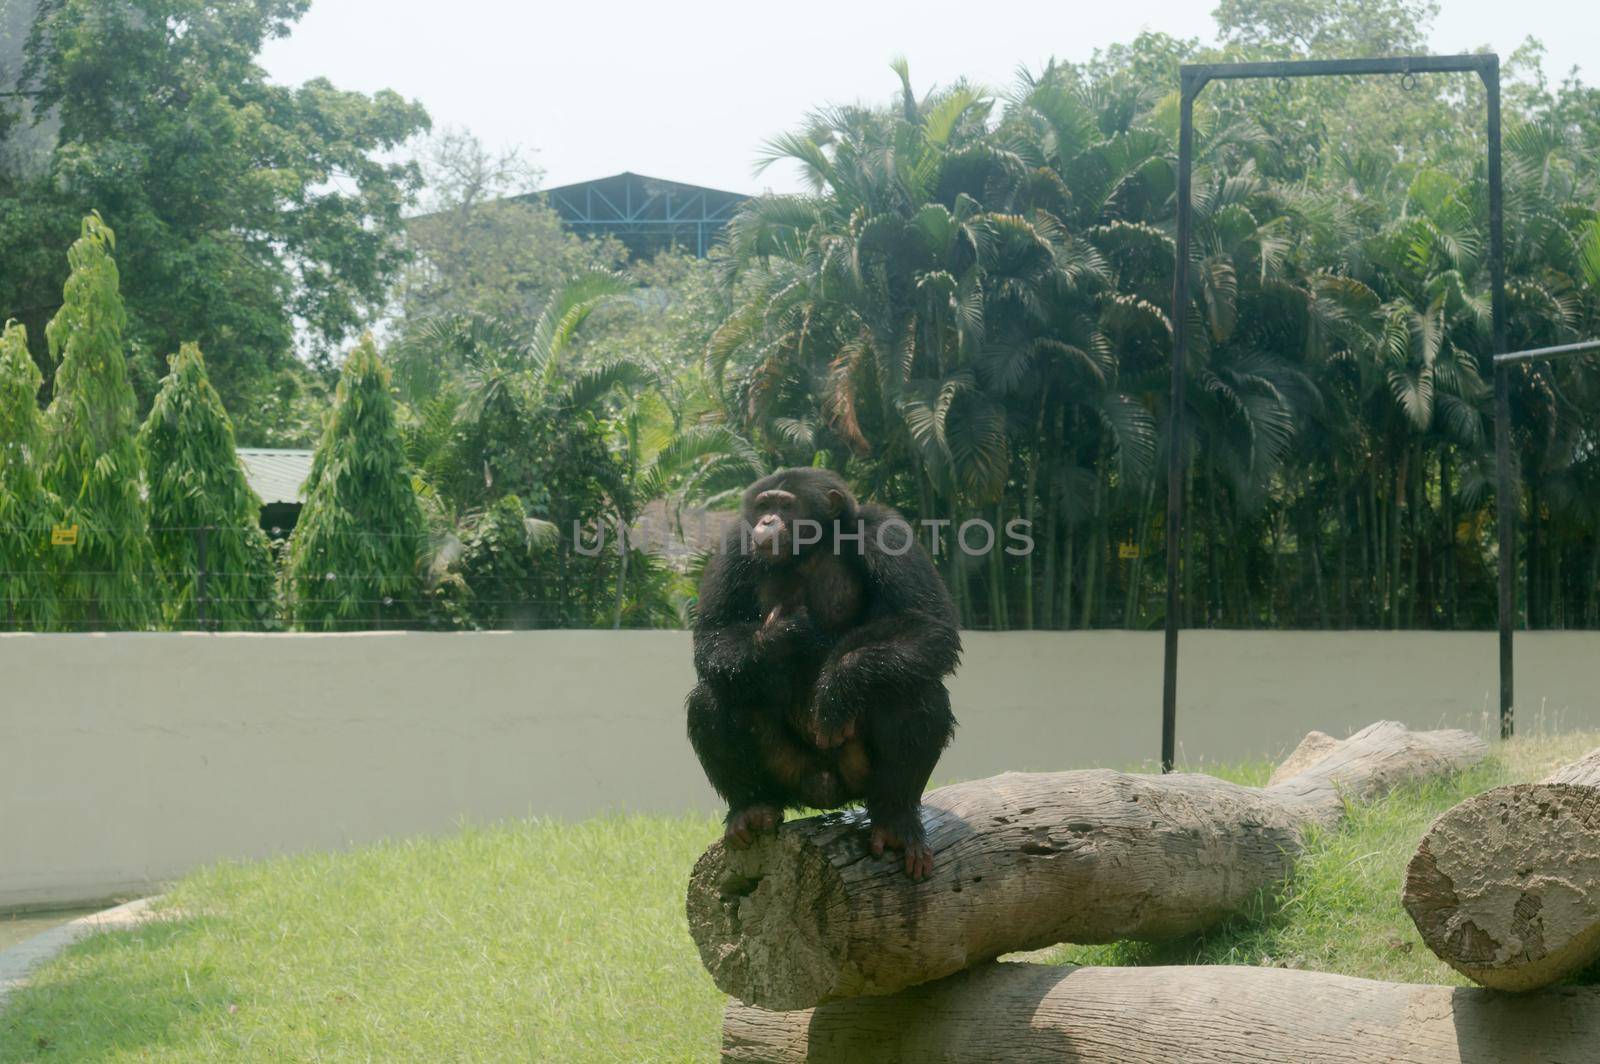 The wild chimpanzee (Pan troglodytes) Babu chimp, endangered species of great ape sitting on a Tree trunk at Alipur Zoological Garden, Kolkata, West Bengal, India South Asia by sudiptabhowmick